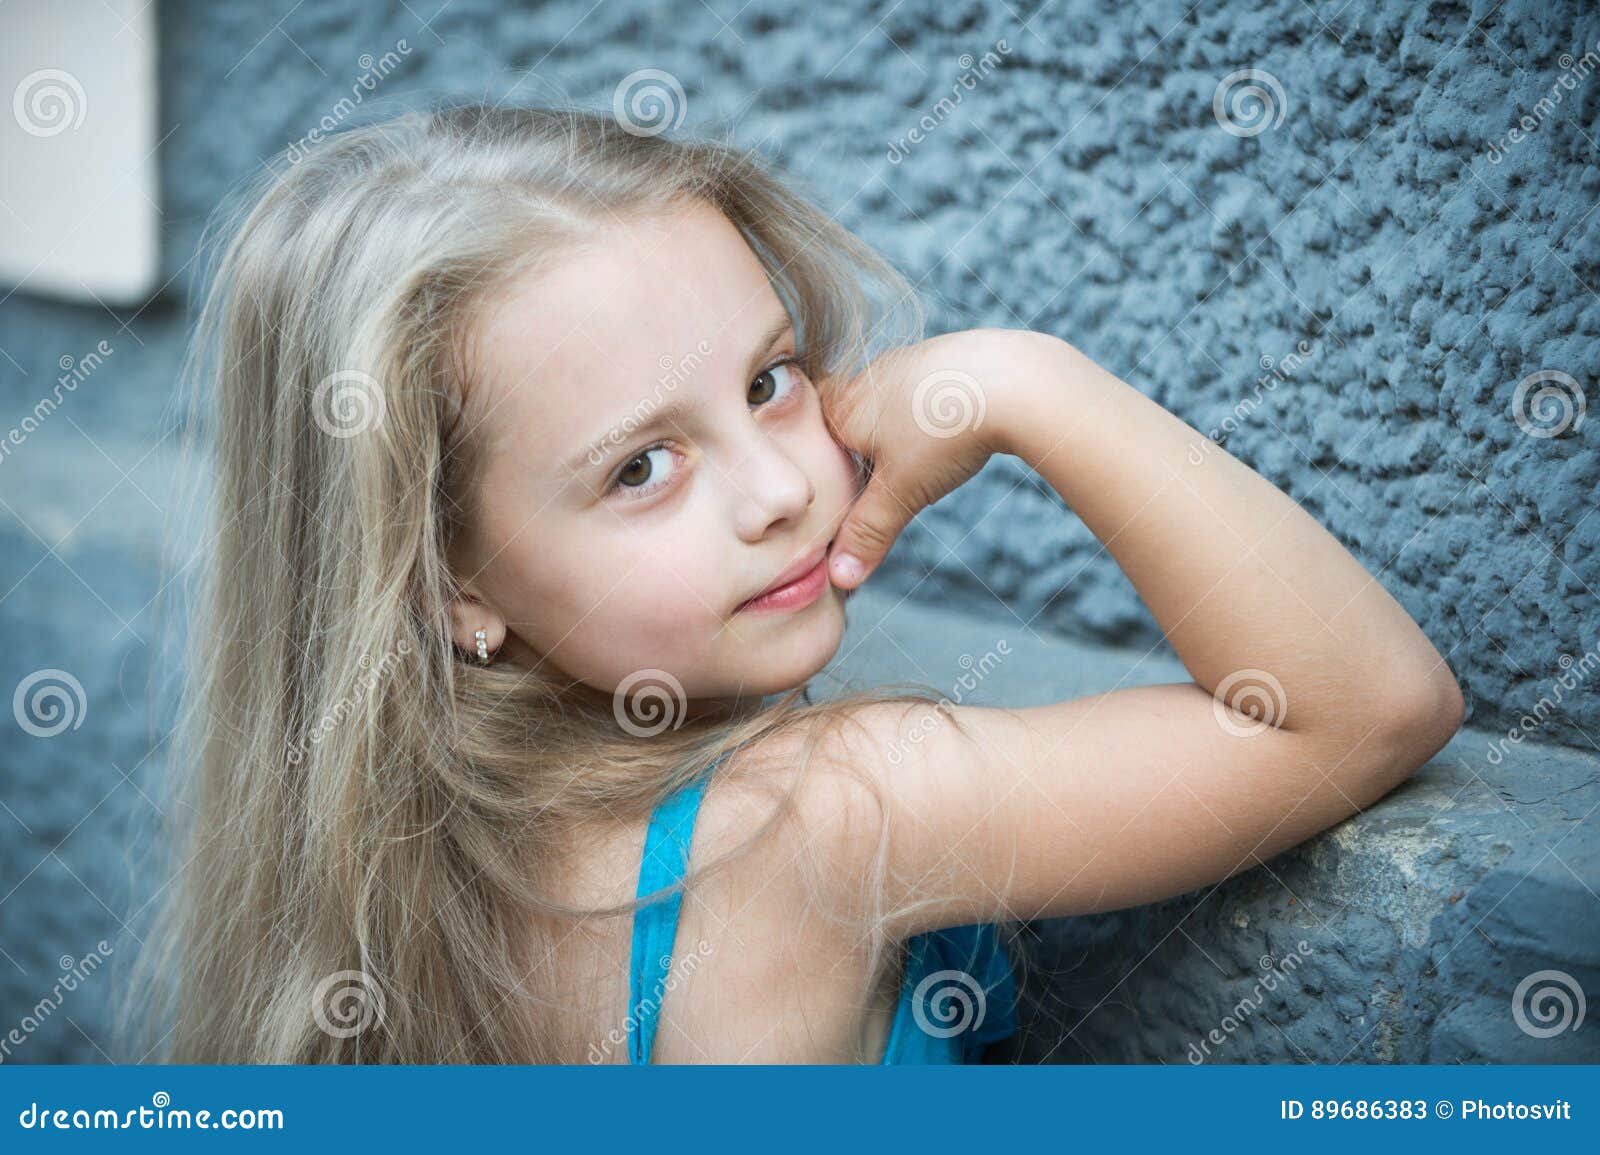 Small Baby Girl With Long Blonde Hair Outdoor Stock Image Image